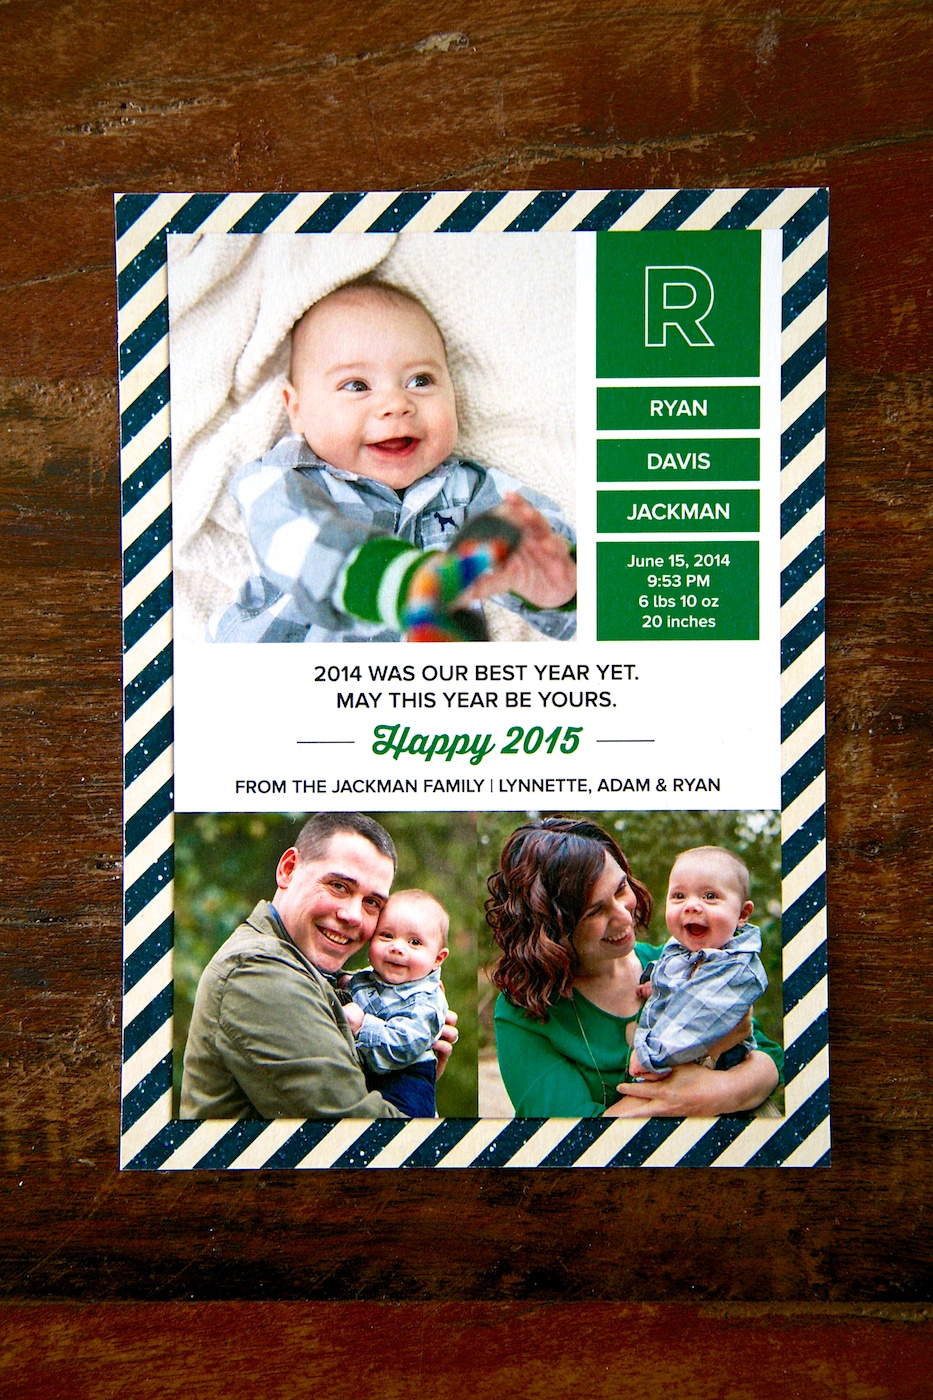 nettiodesigns_New-Year-Baby-Announcement_4